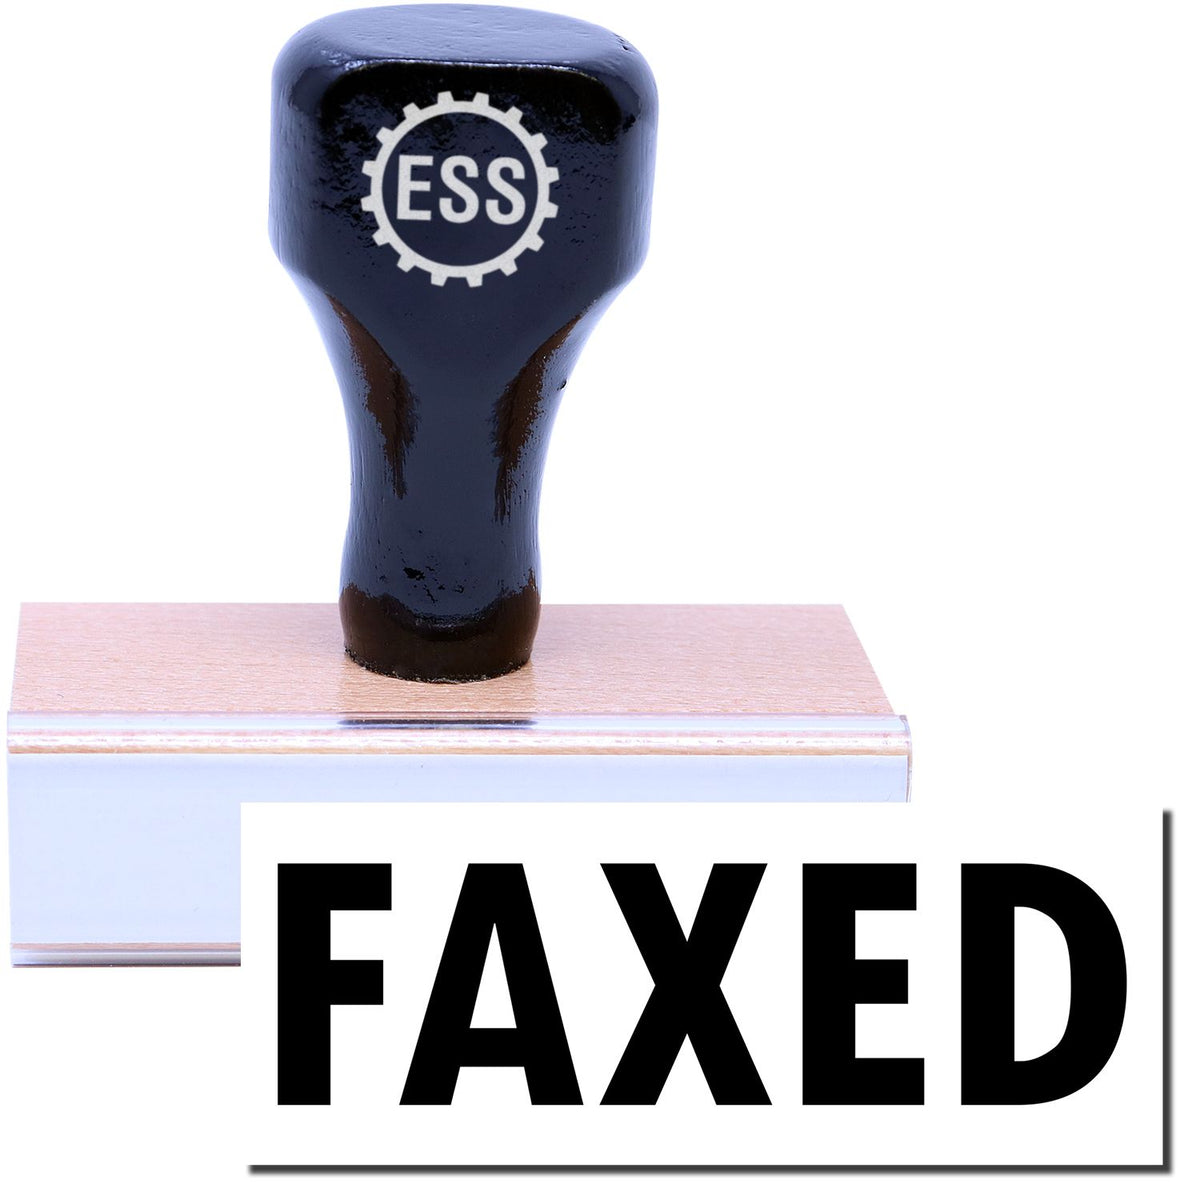 A stock office rubber stamp with a stamped image showing how the text &quot;FAXED&quot; is displayed after stamping.